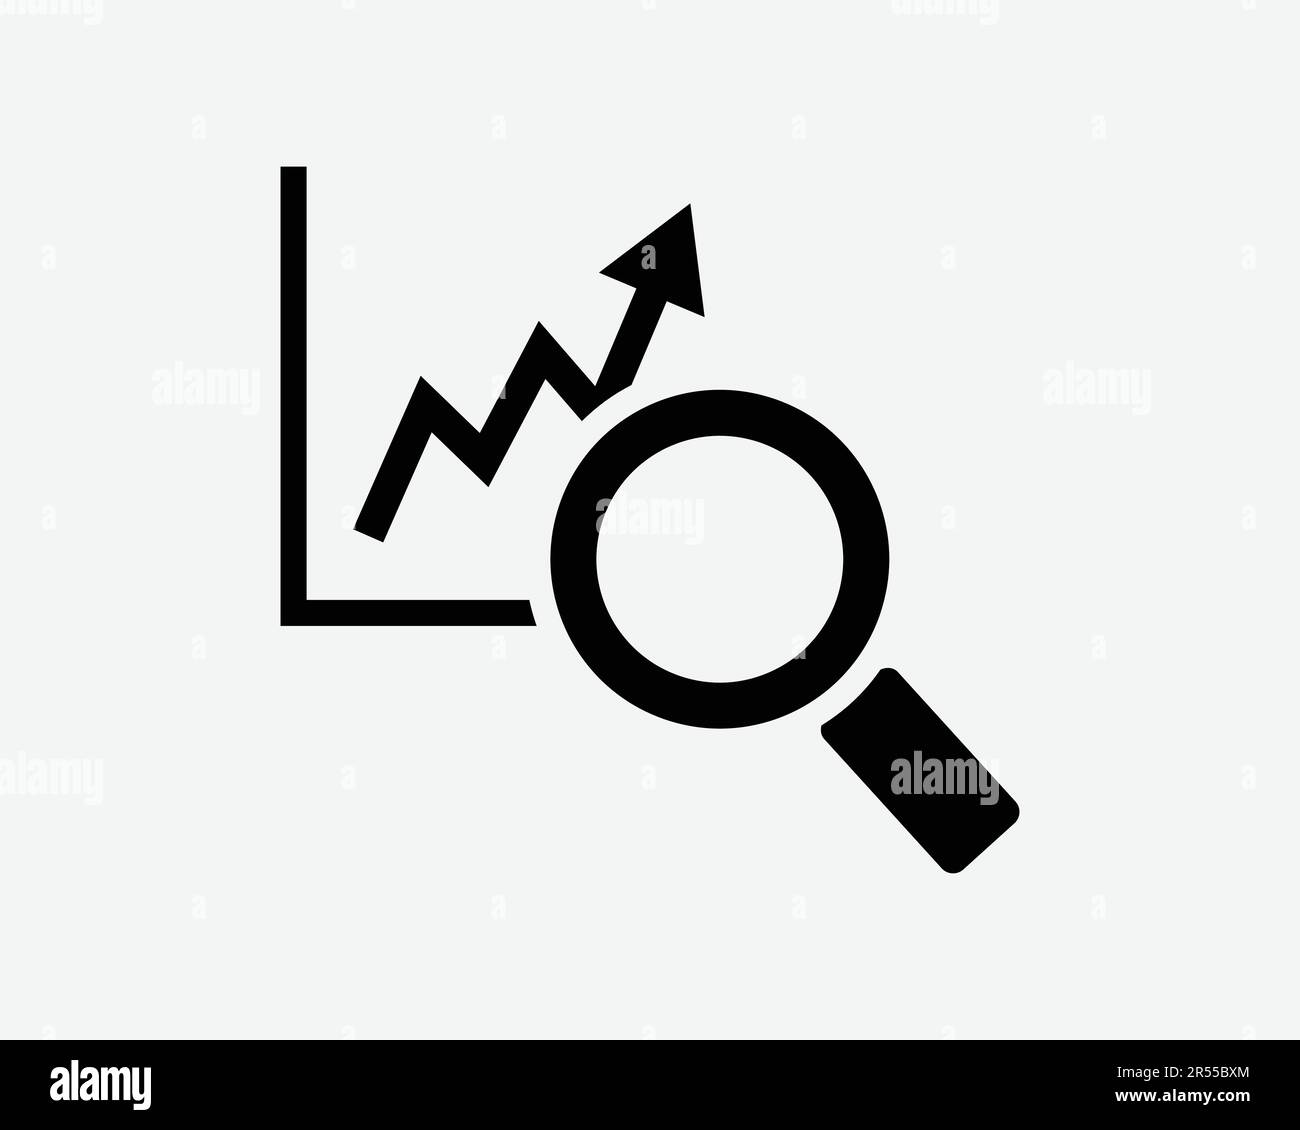 Chart Analysis Icon. Statistics Business Finance Research Growth Sales Magnify Glass Sign Symbol Black Artwork Graphic Illustration Clipart EPS Vector Stock Vector